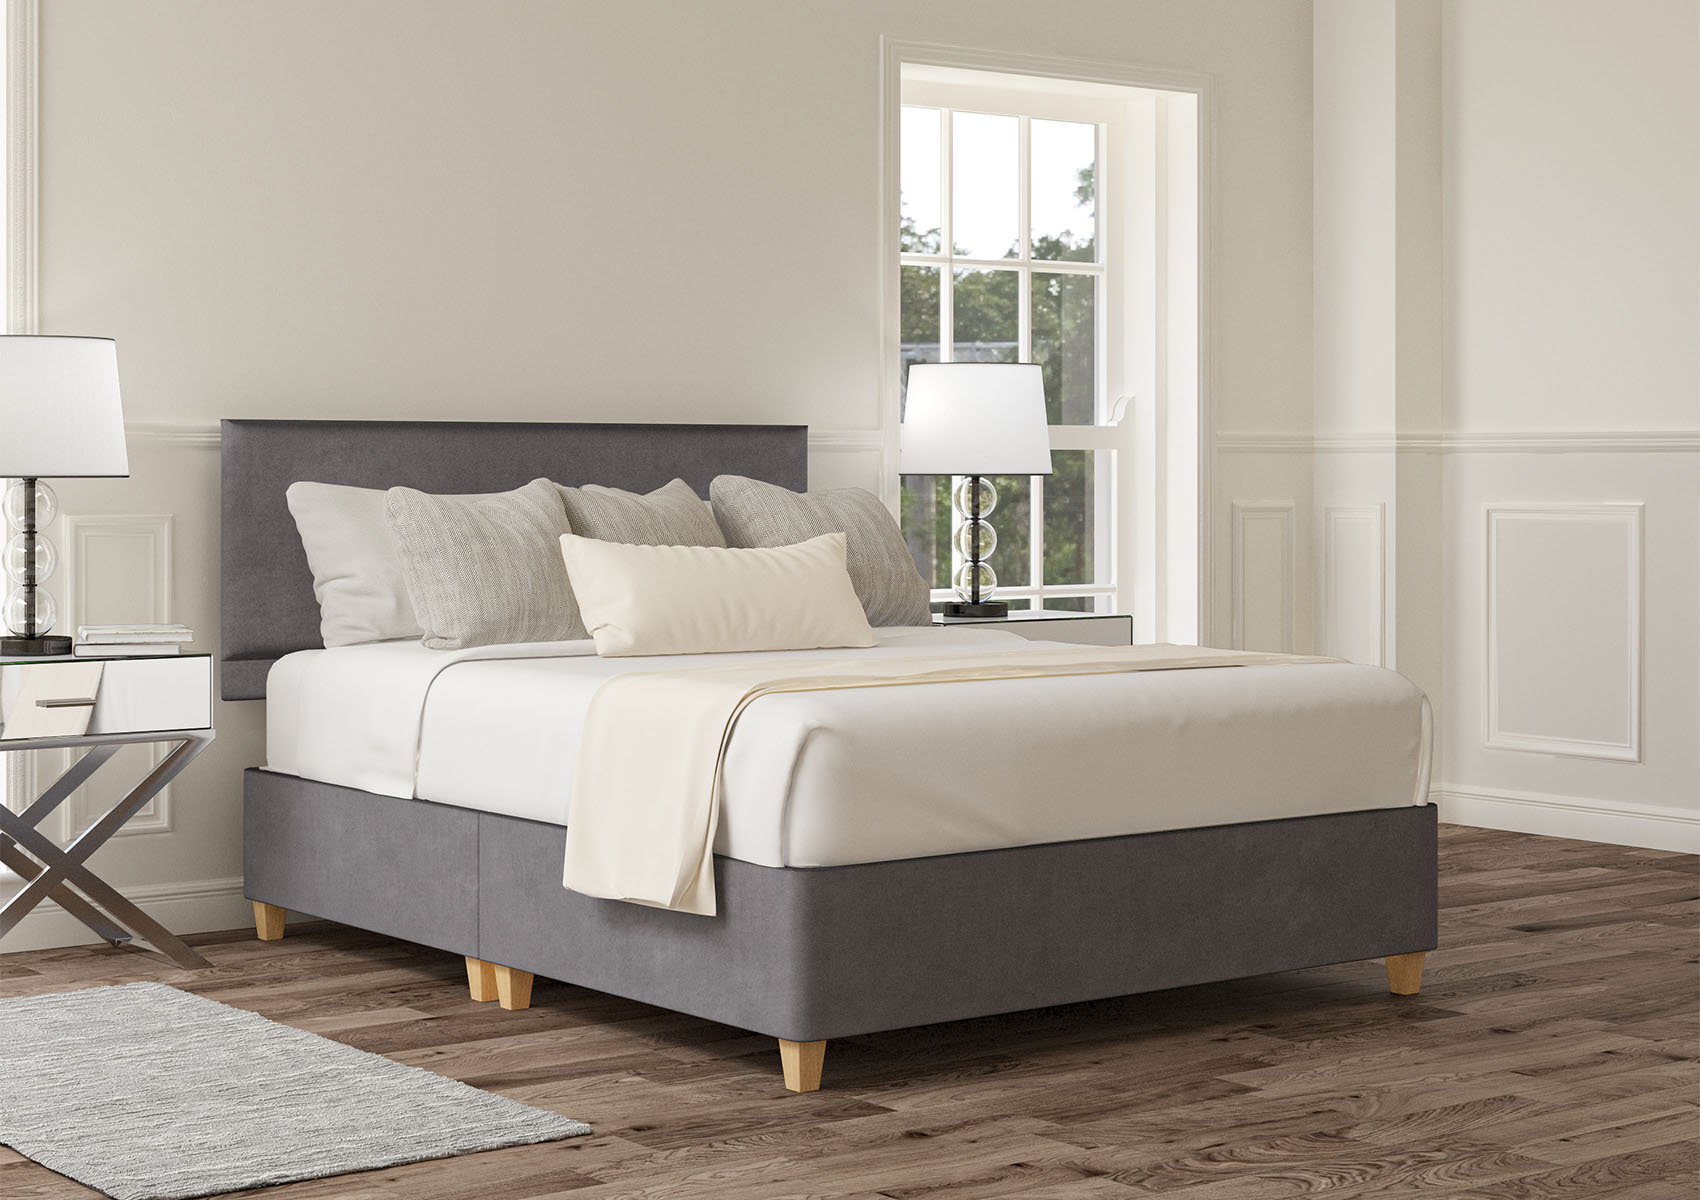 View Henley Plush Steel Upholstered Single Bed Time4Sleep information